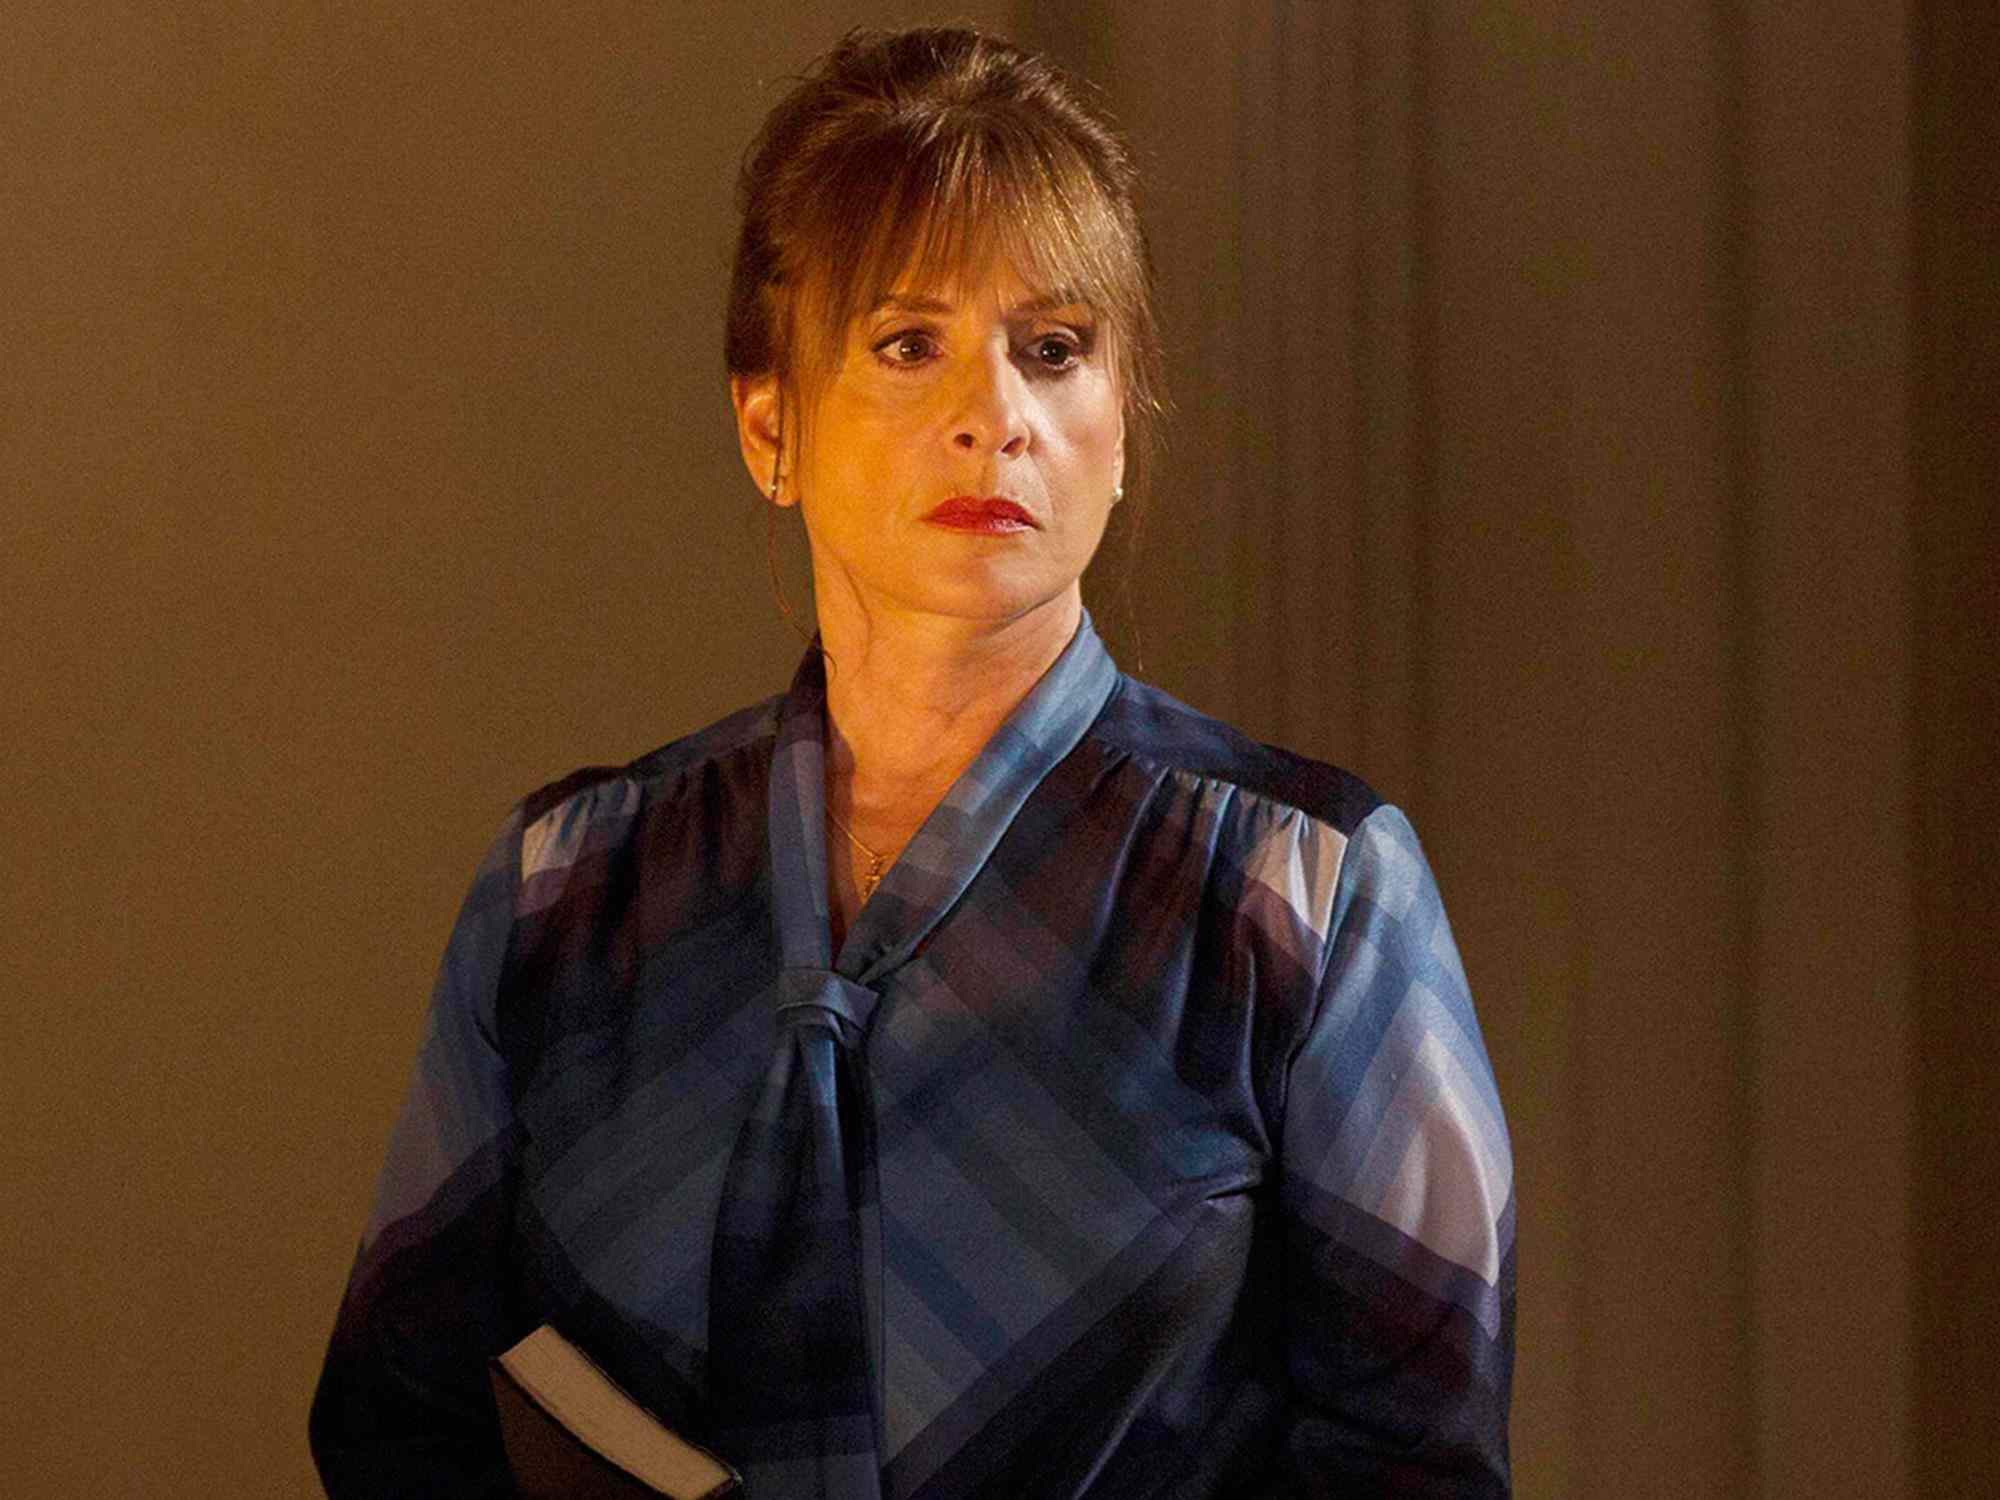 Patti LuPone in 'American Horror Story: Coven' 